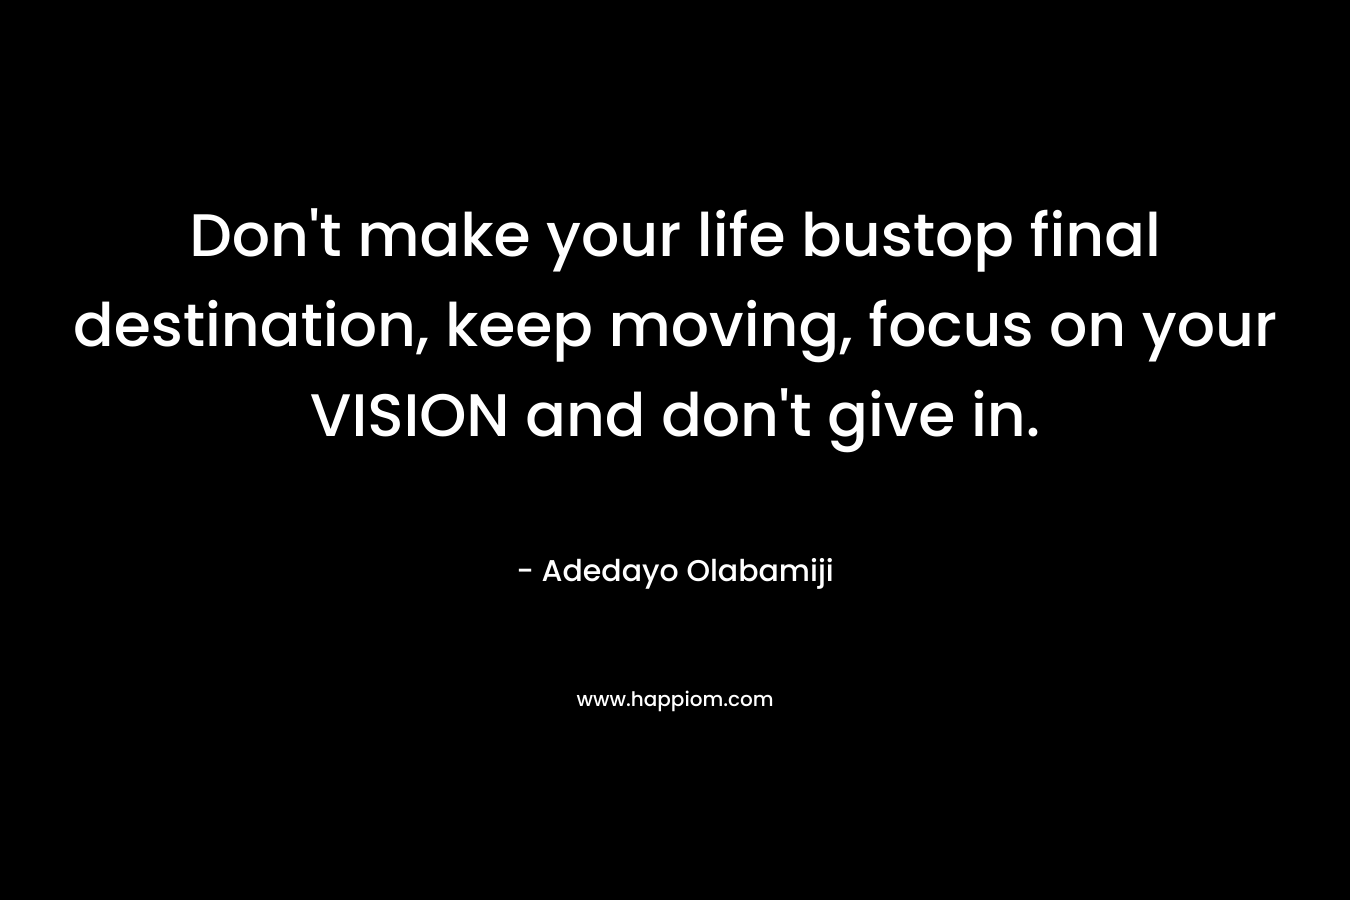 Don't make your life bustop final destination, keep moving, focus on your VISION and don't give in.